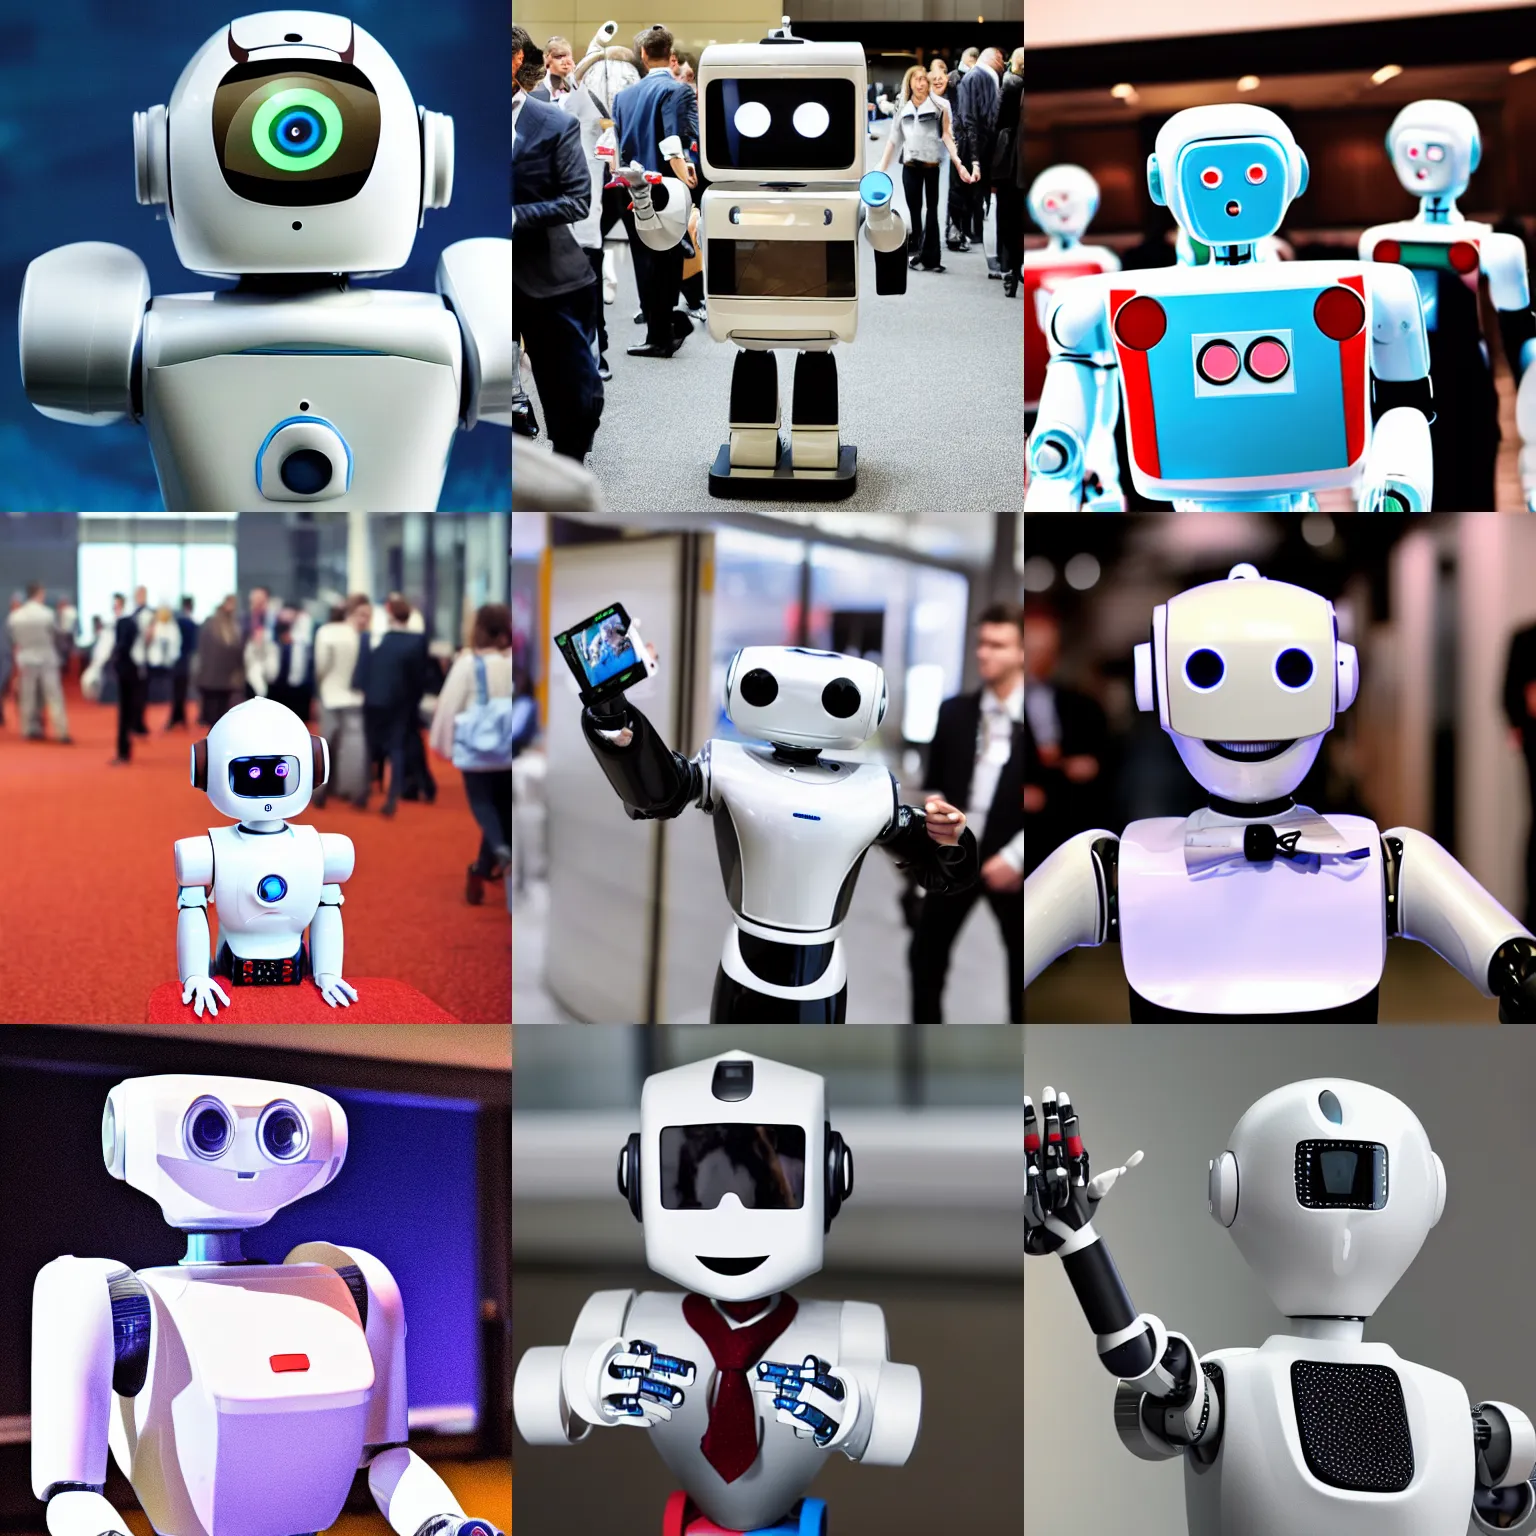 Prompt: < photo attention - grabbing magazine - cover > robot wearing tie excited to meet other robots at a conference < photo >